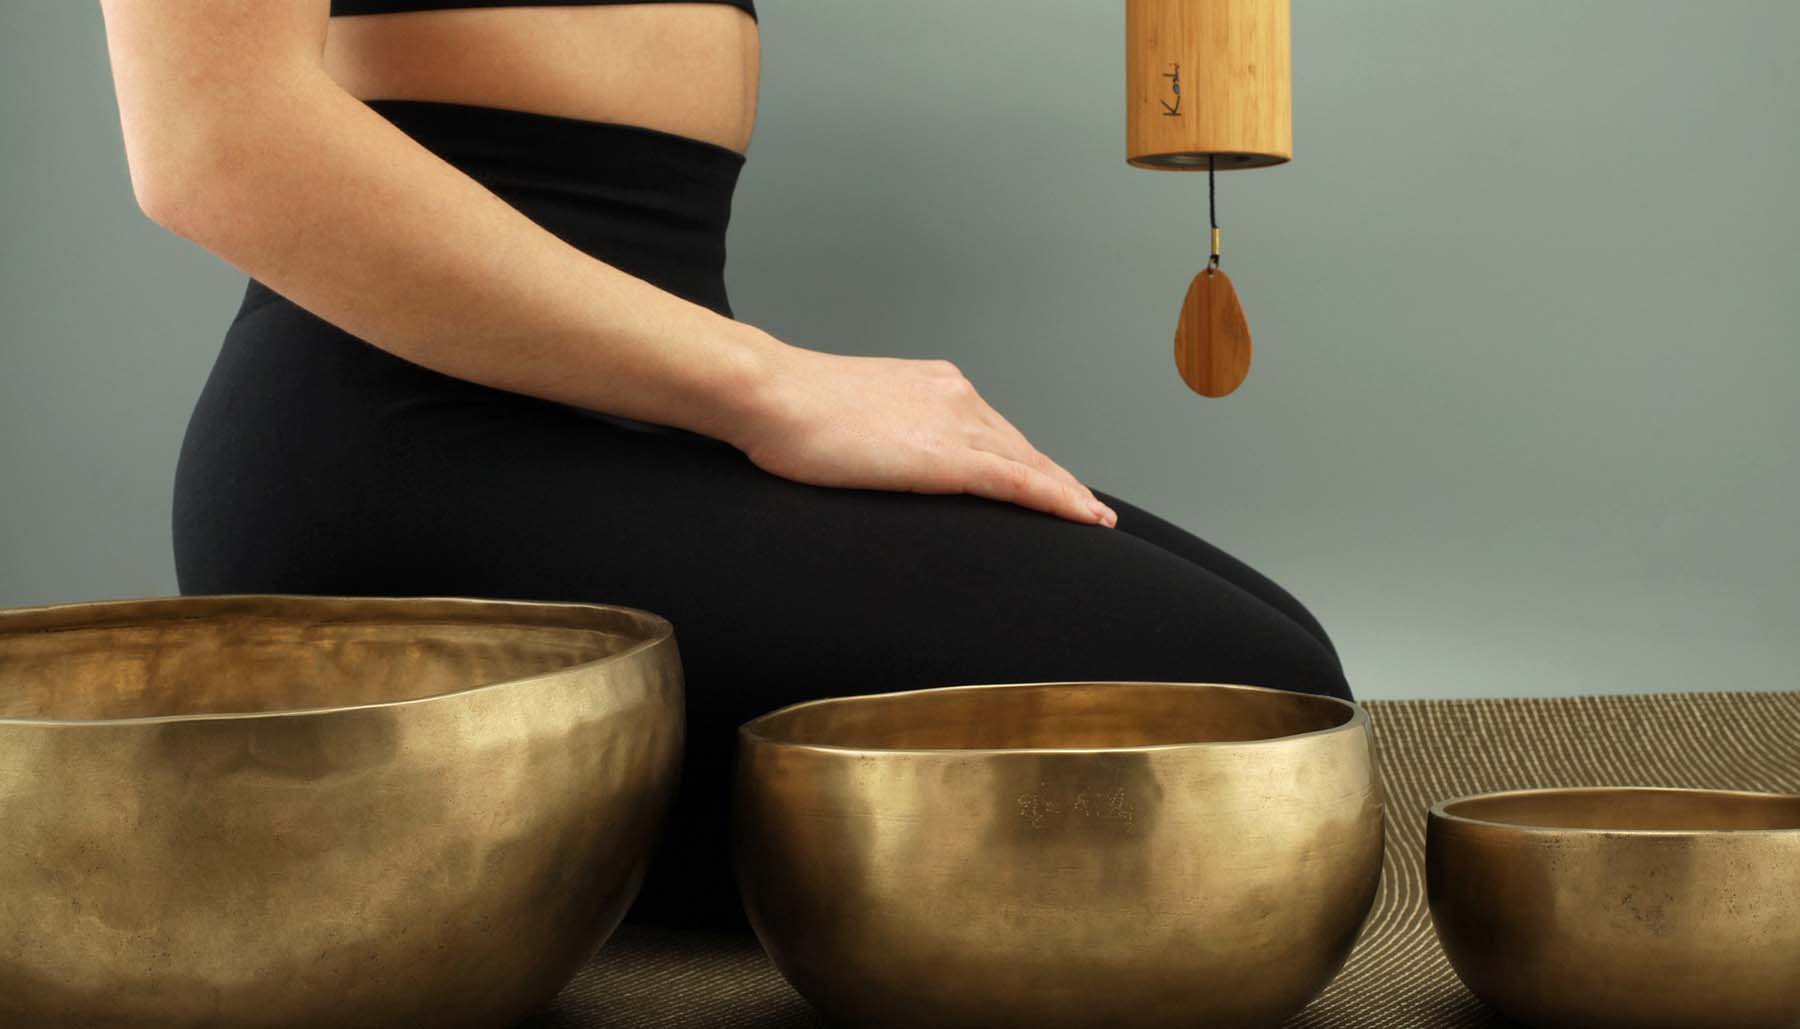 sound bath instructor with gold bowls and wind chime